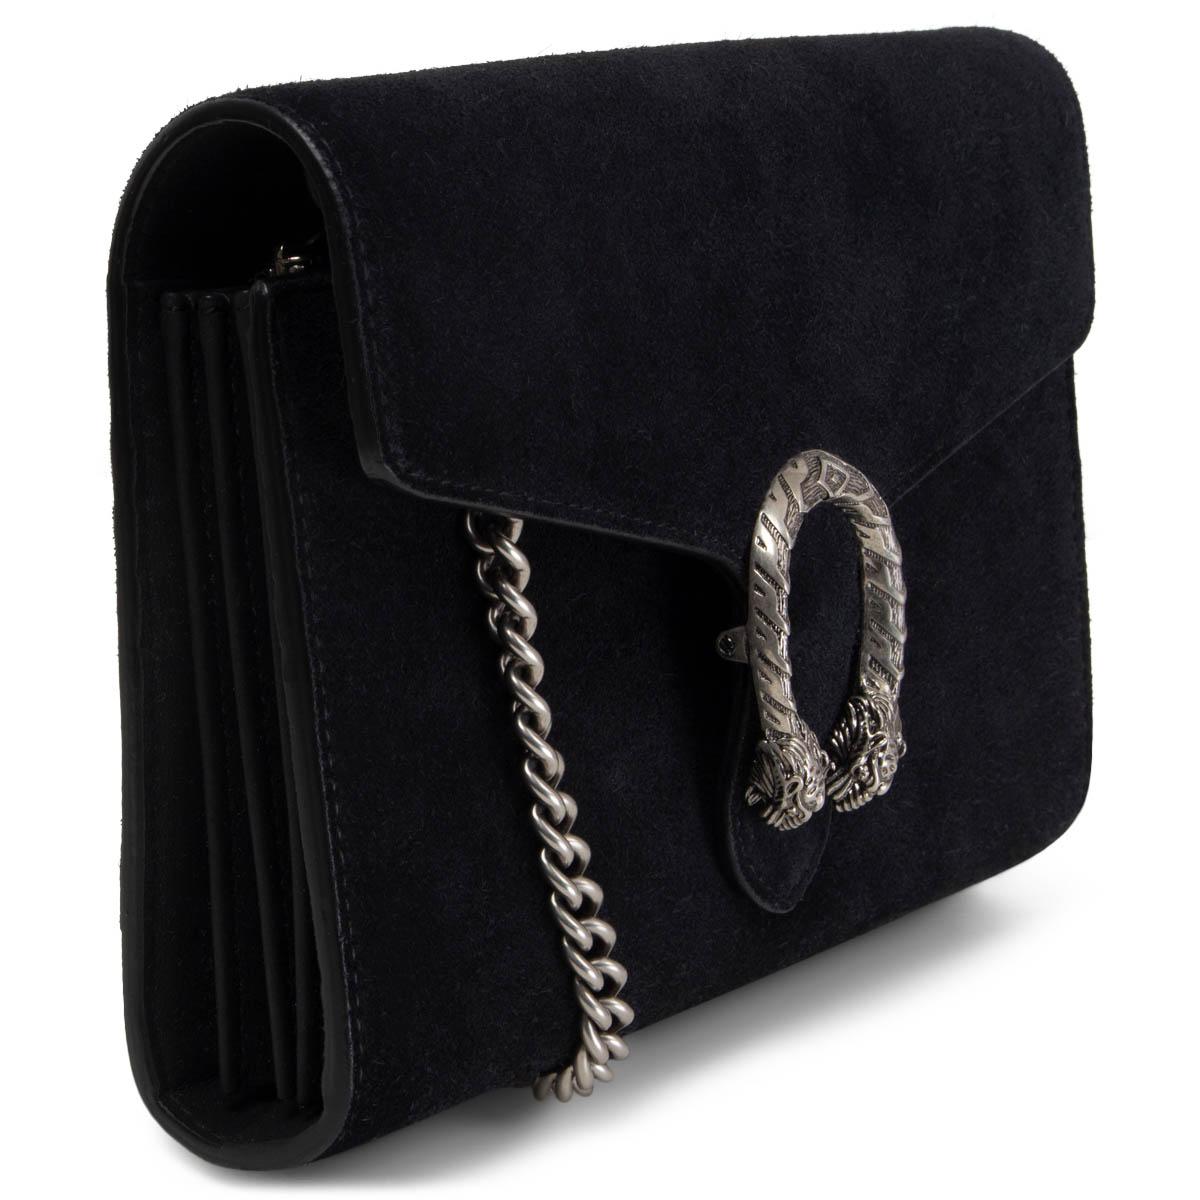 100% authentic Gucci Dionysus Wallet On Chain crossbody bag in black suede. The closure has the textured tiger head spur closure-a unique detail referencing the Greek god Dionysus, who in myth is said to have crossed the river Tigris on a tiger sent